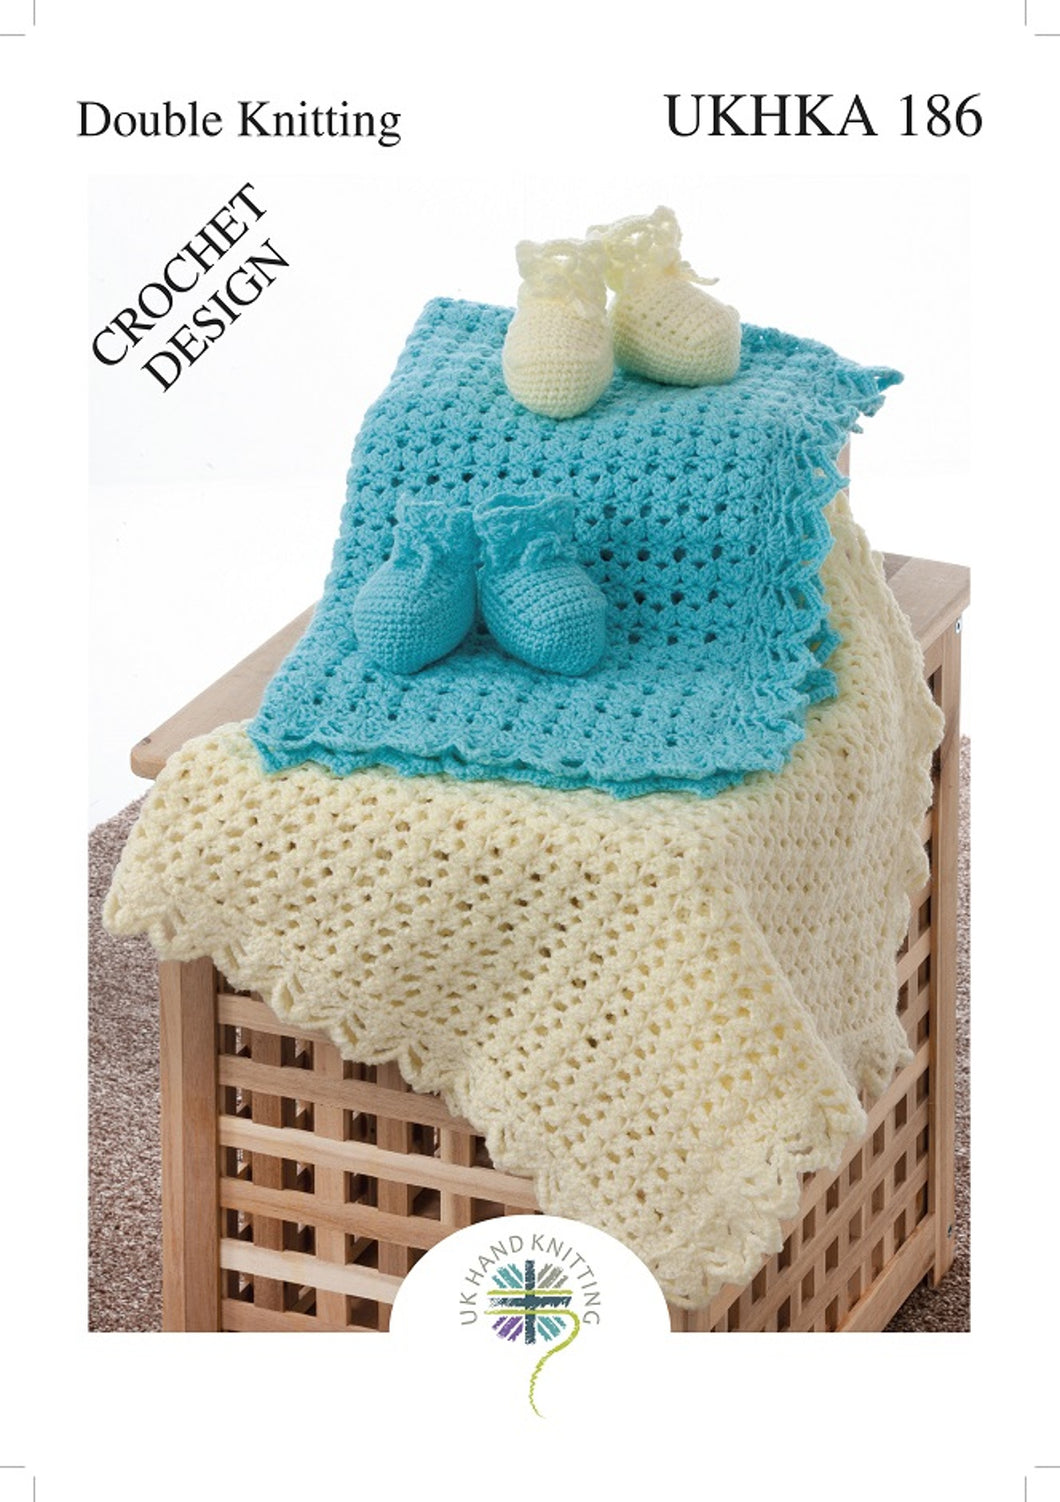 Double Knit Crochet Pattern for Baby Blanket & Bootees (UKHKA 186)